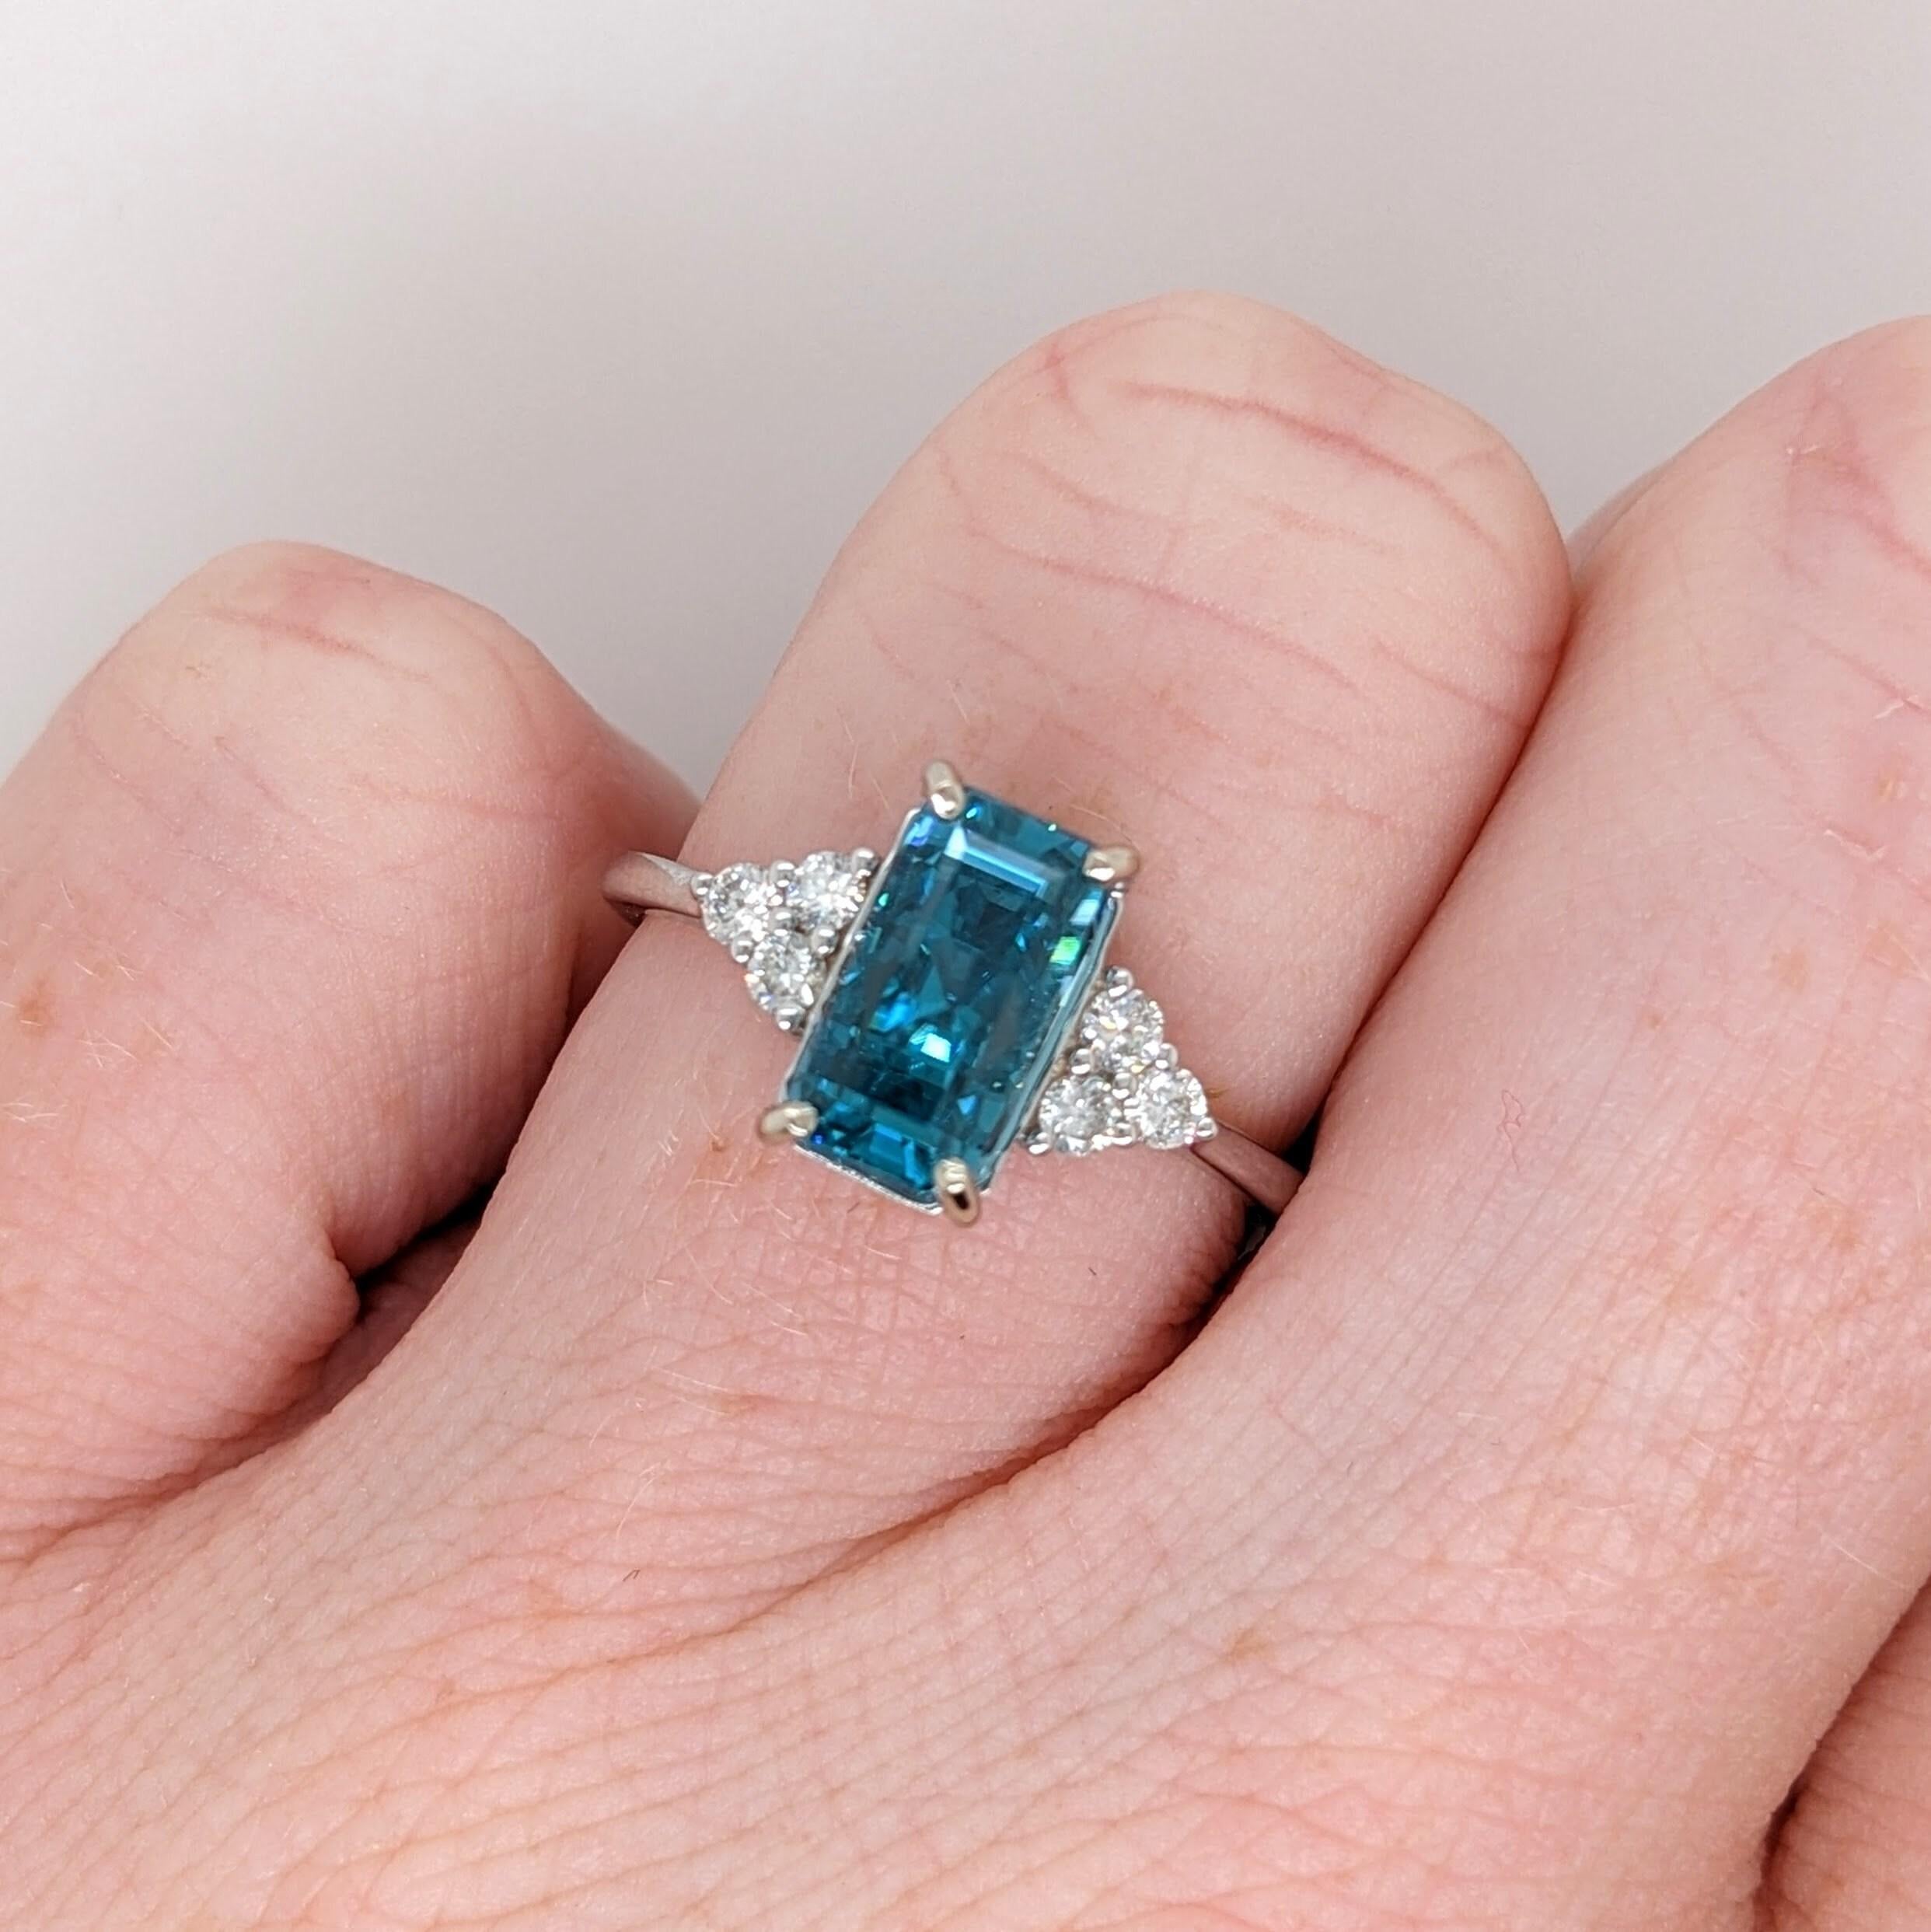 4.2ct Blue Zircon Ring w Earth Mined Diamonds in Solid 14K White Gold EM 9.5x6mm In New Condition For Sale In Columbus, OH